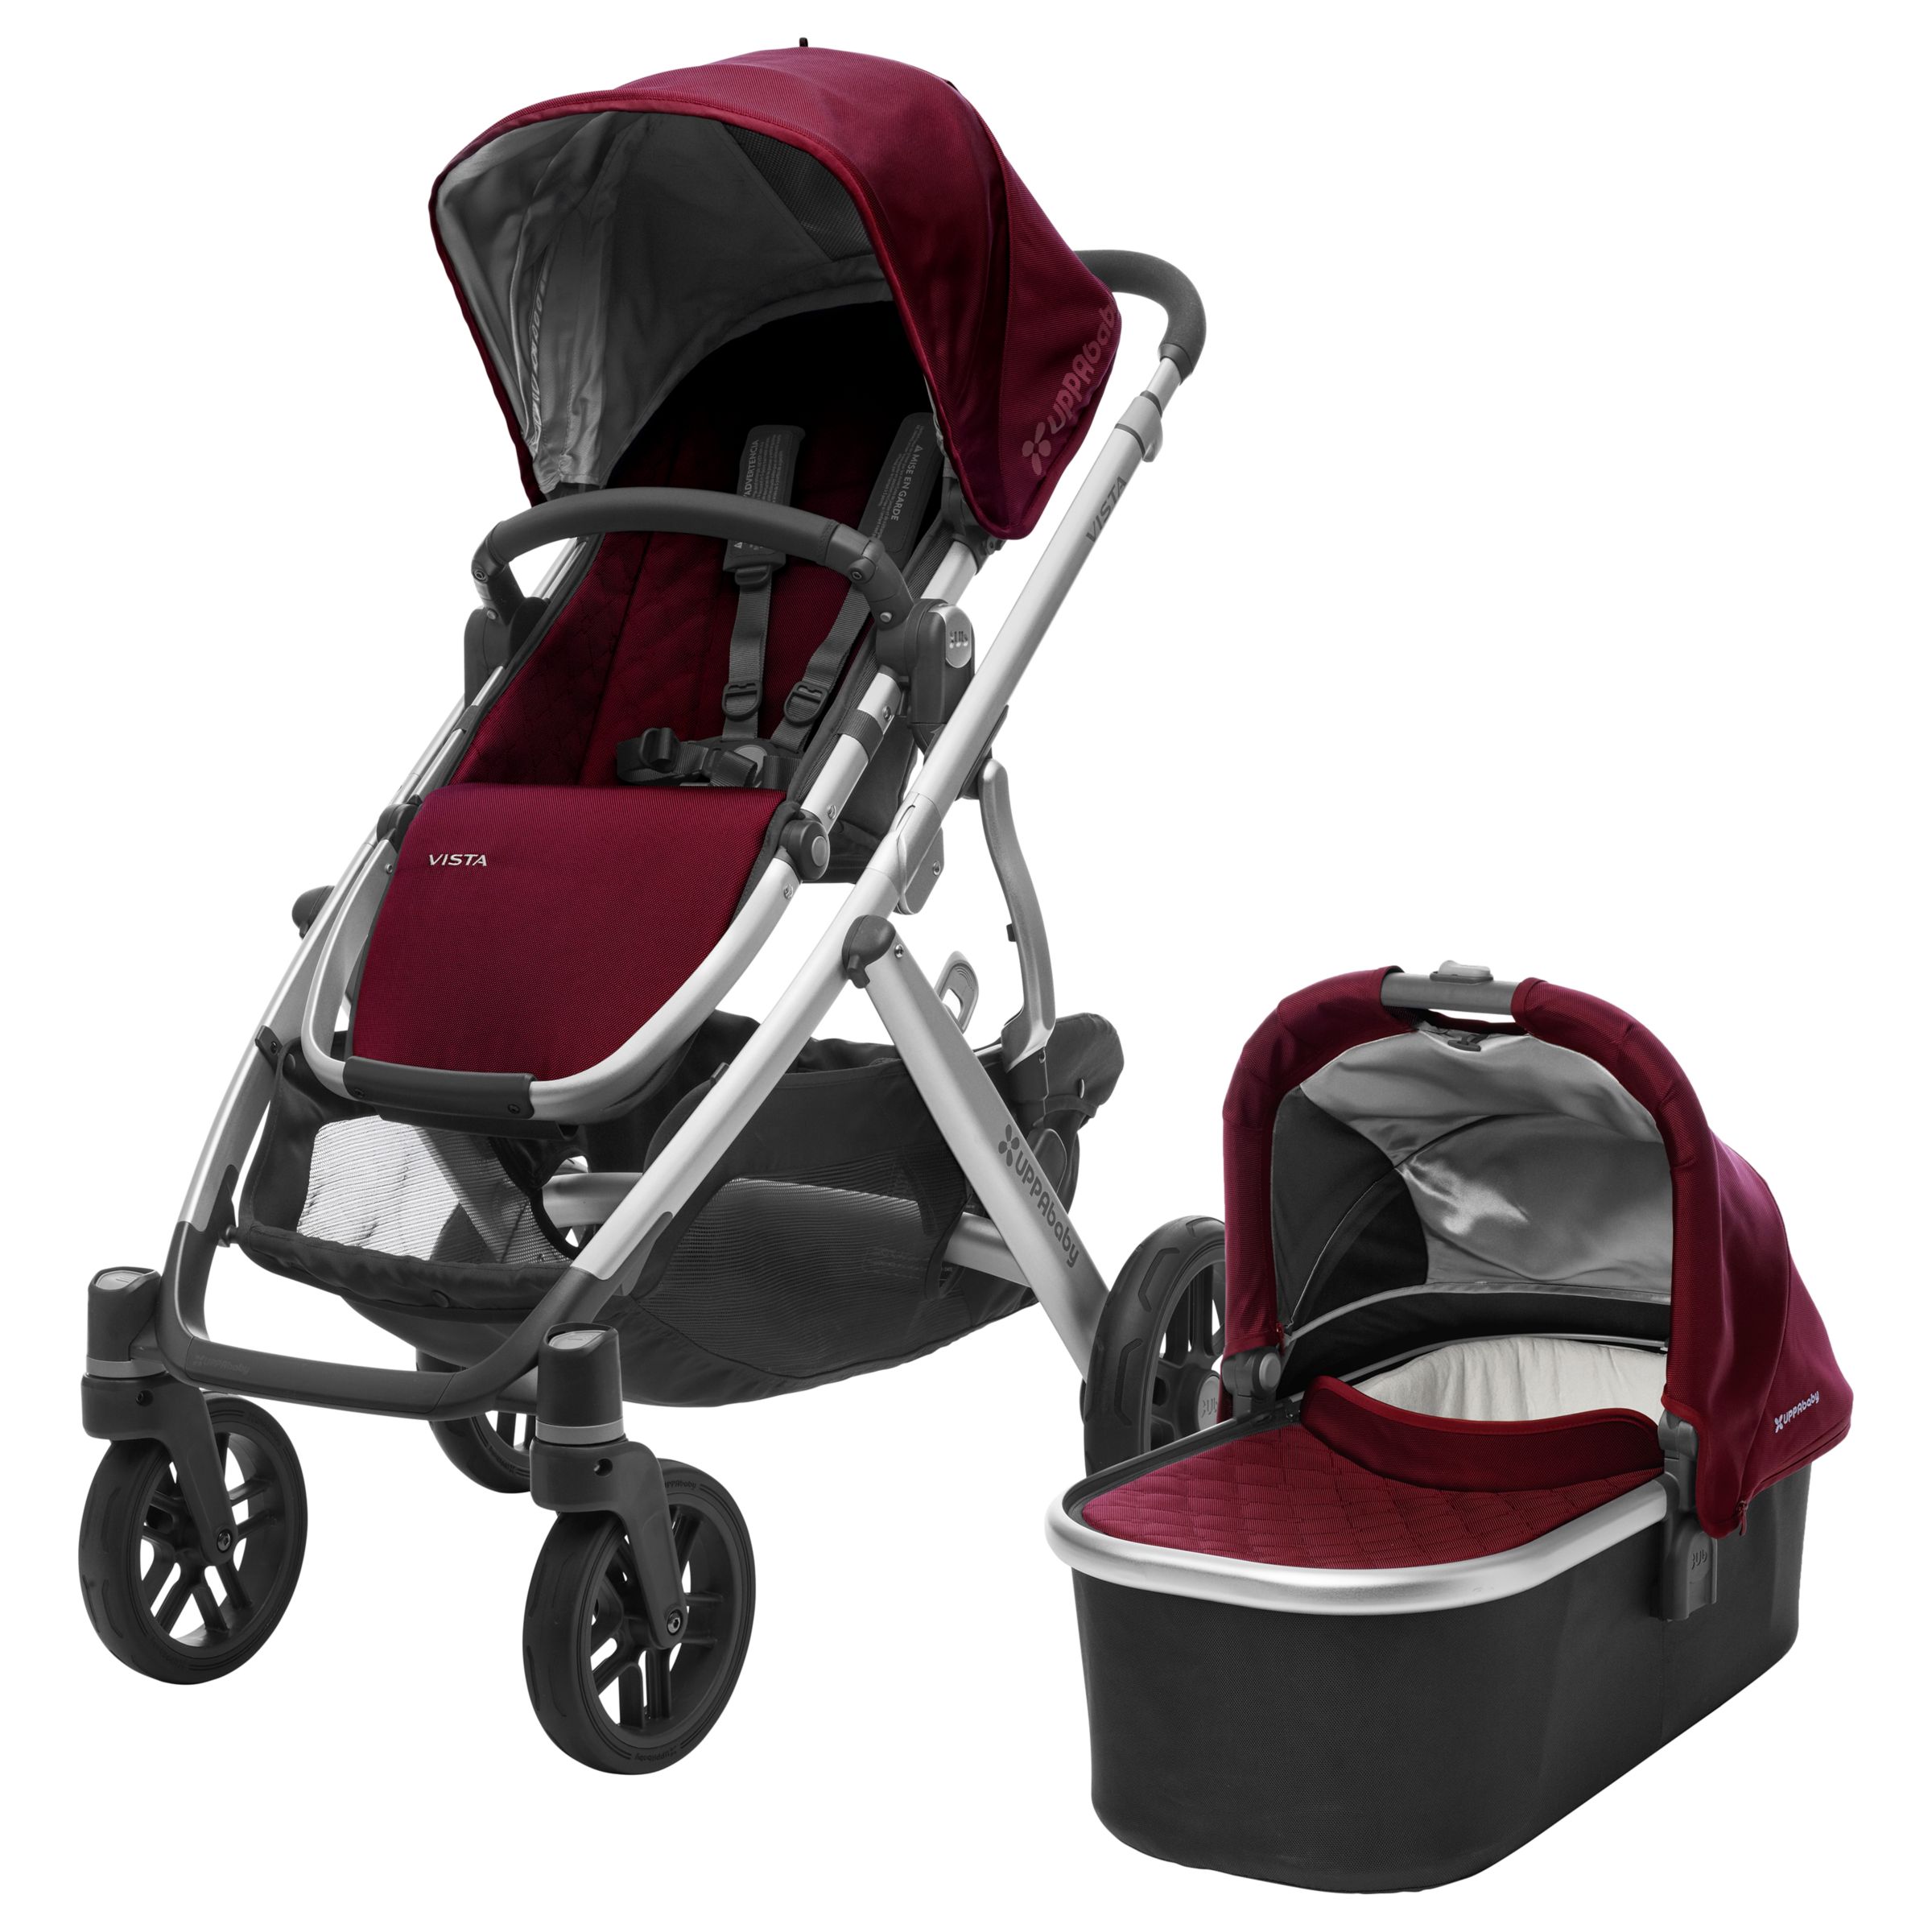 Buy Uppababy Vista 2017 Pushchair and Carrycot, Dennison | John Lewis